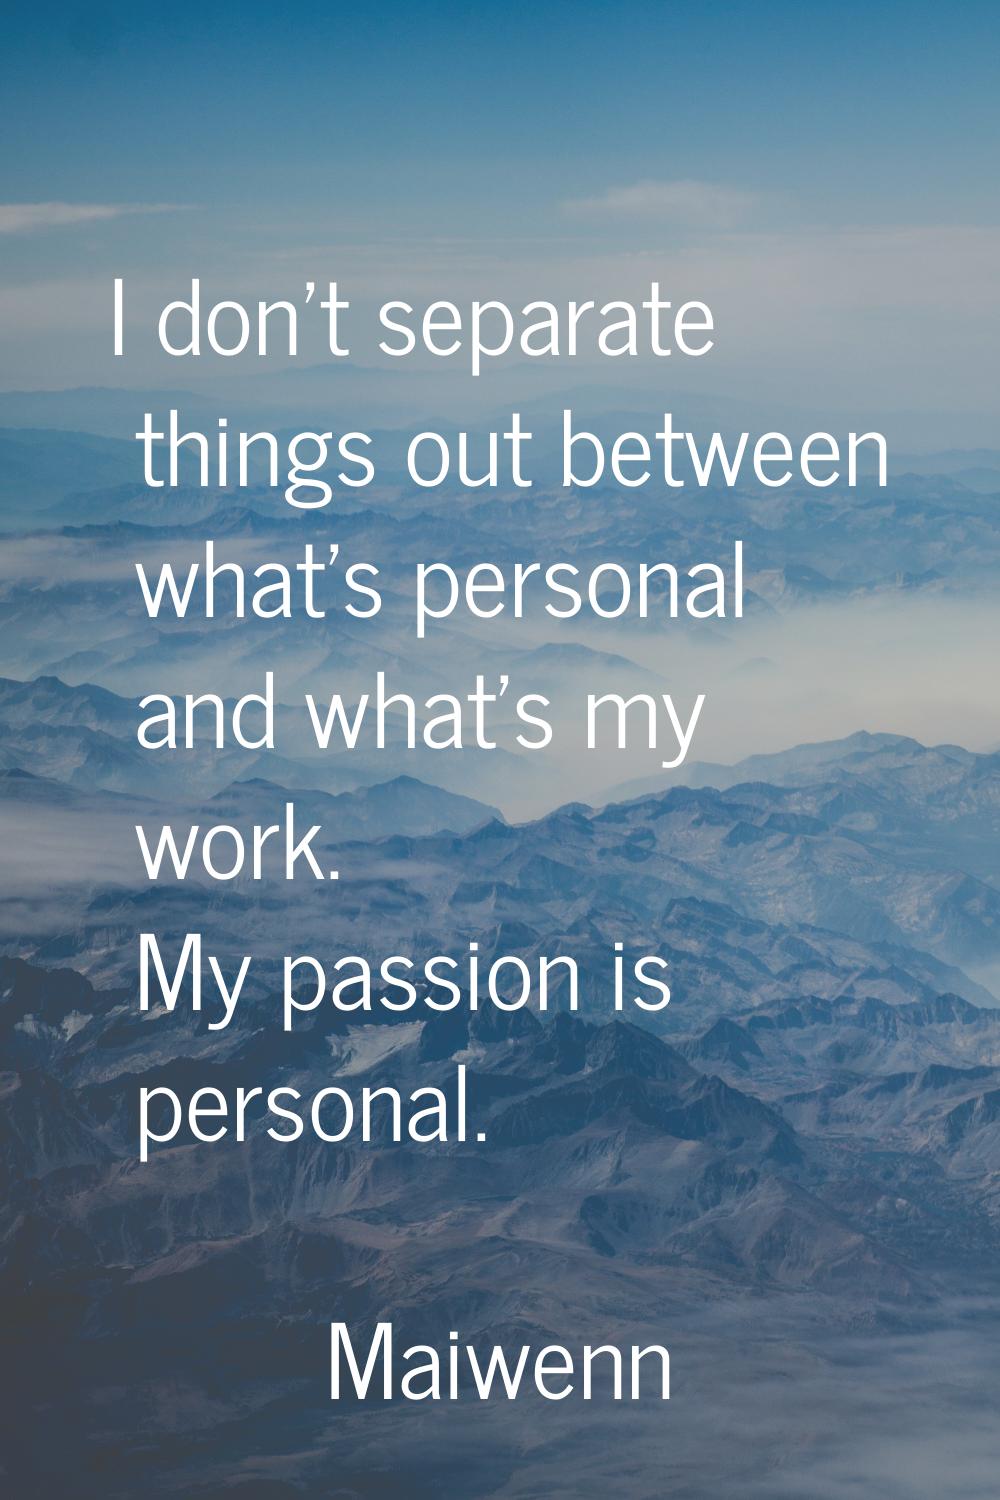 I don't separate things out between what's personal and what's my work. My passion is personal.